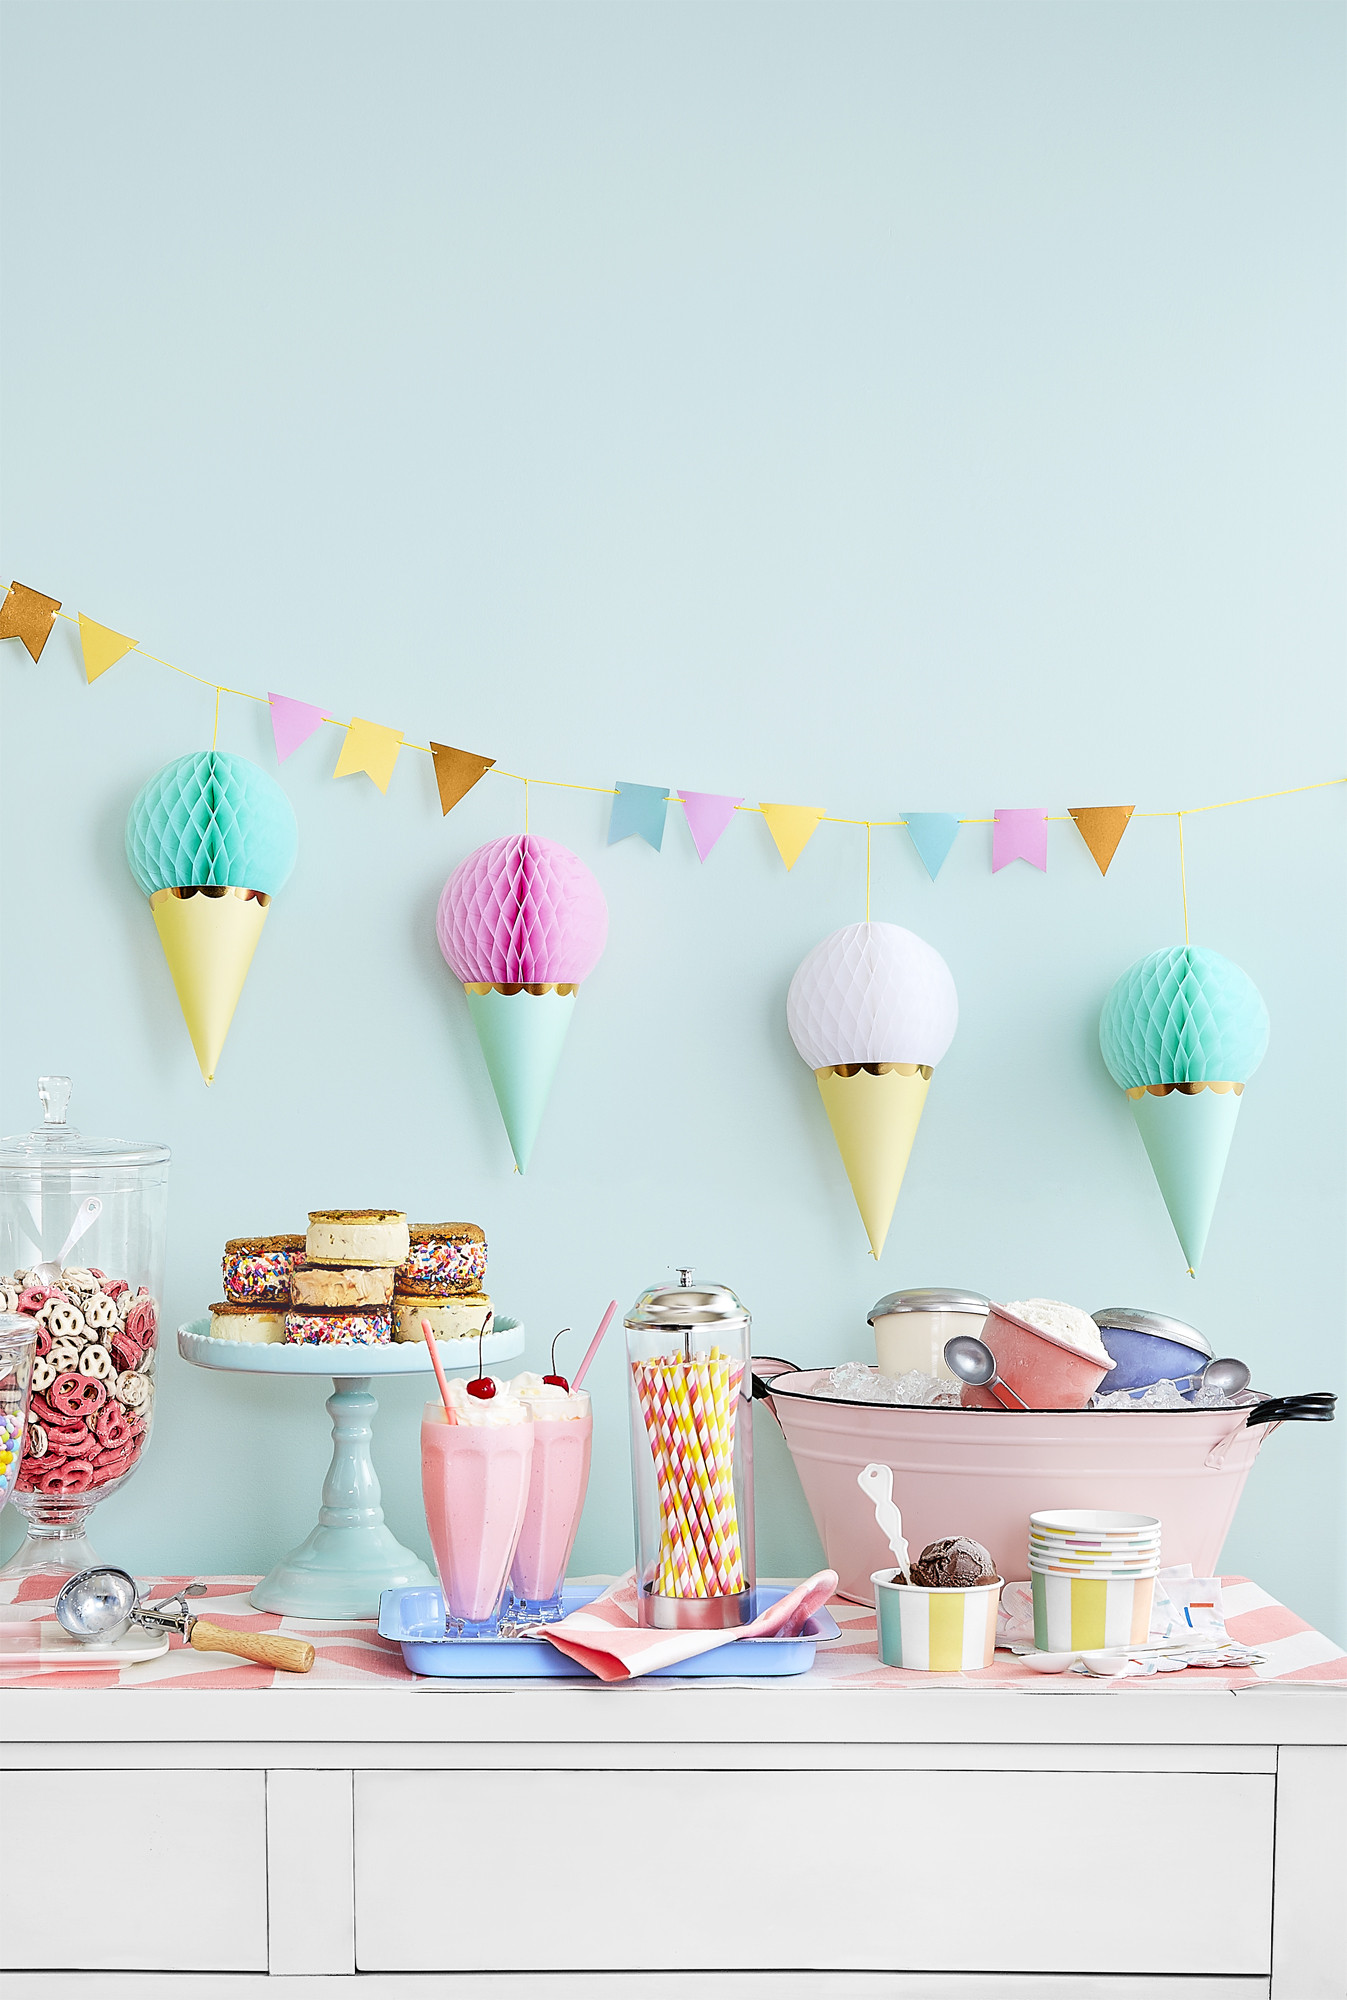 DIY Party Decorations For Kids
 15 DIY Birthday Party Decoration Ideas Cute Homemade